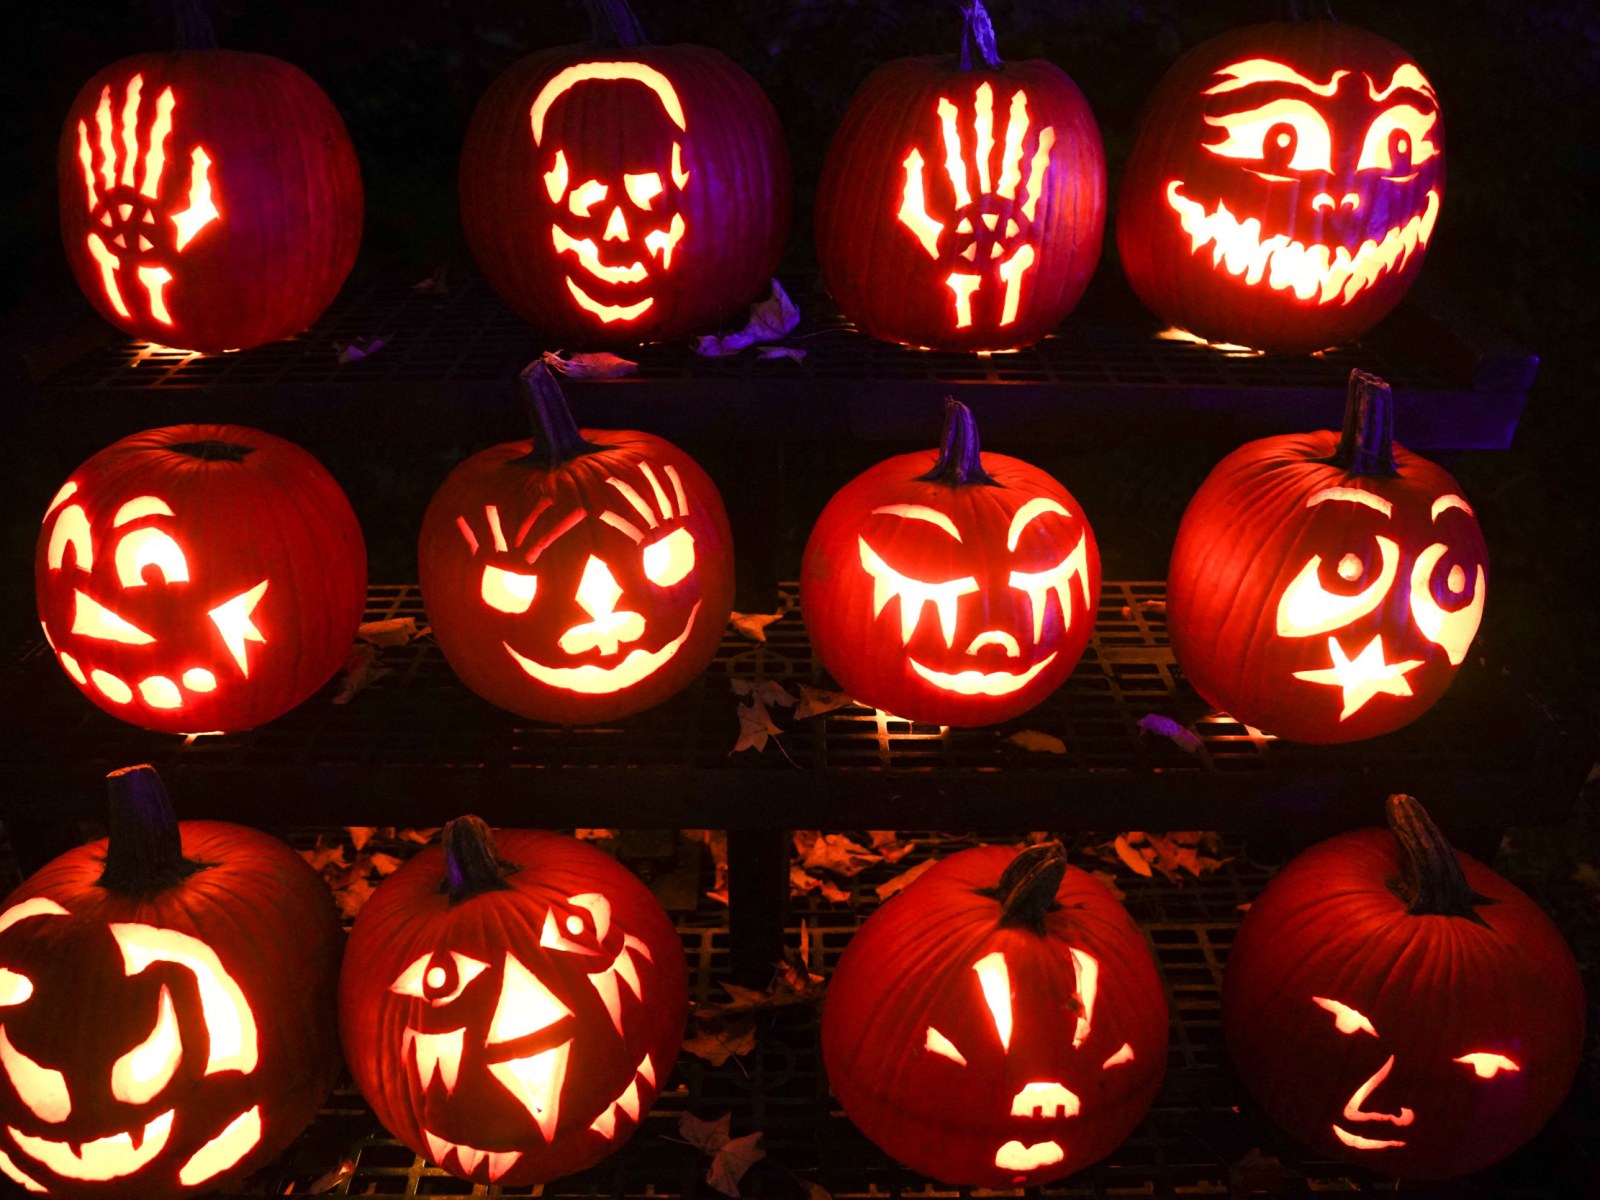 Why Do We Celebrate Halloween? The Intriguing History Behind the Holiday